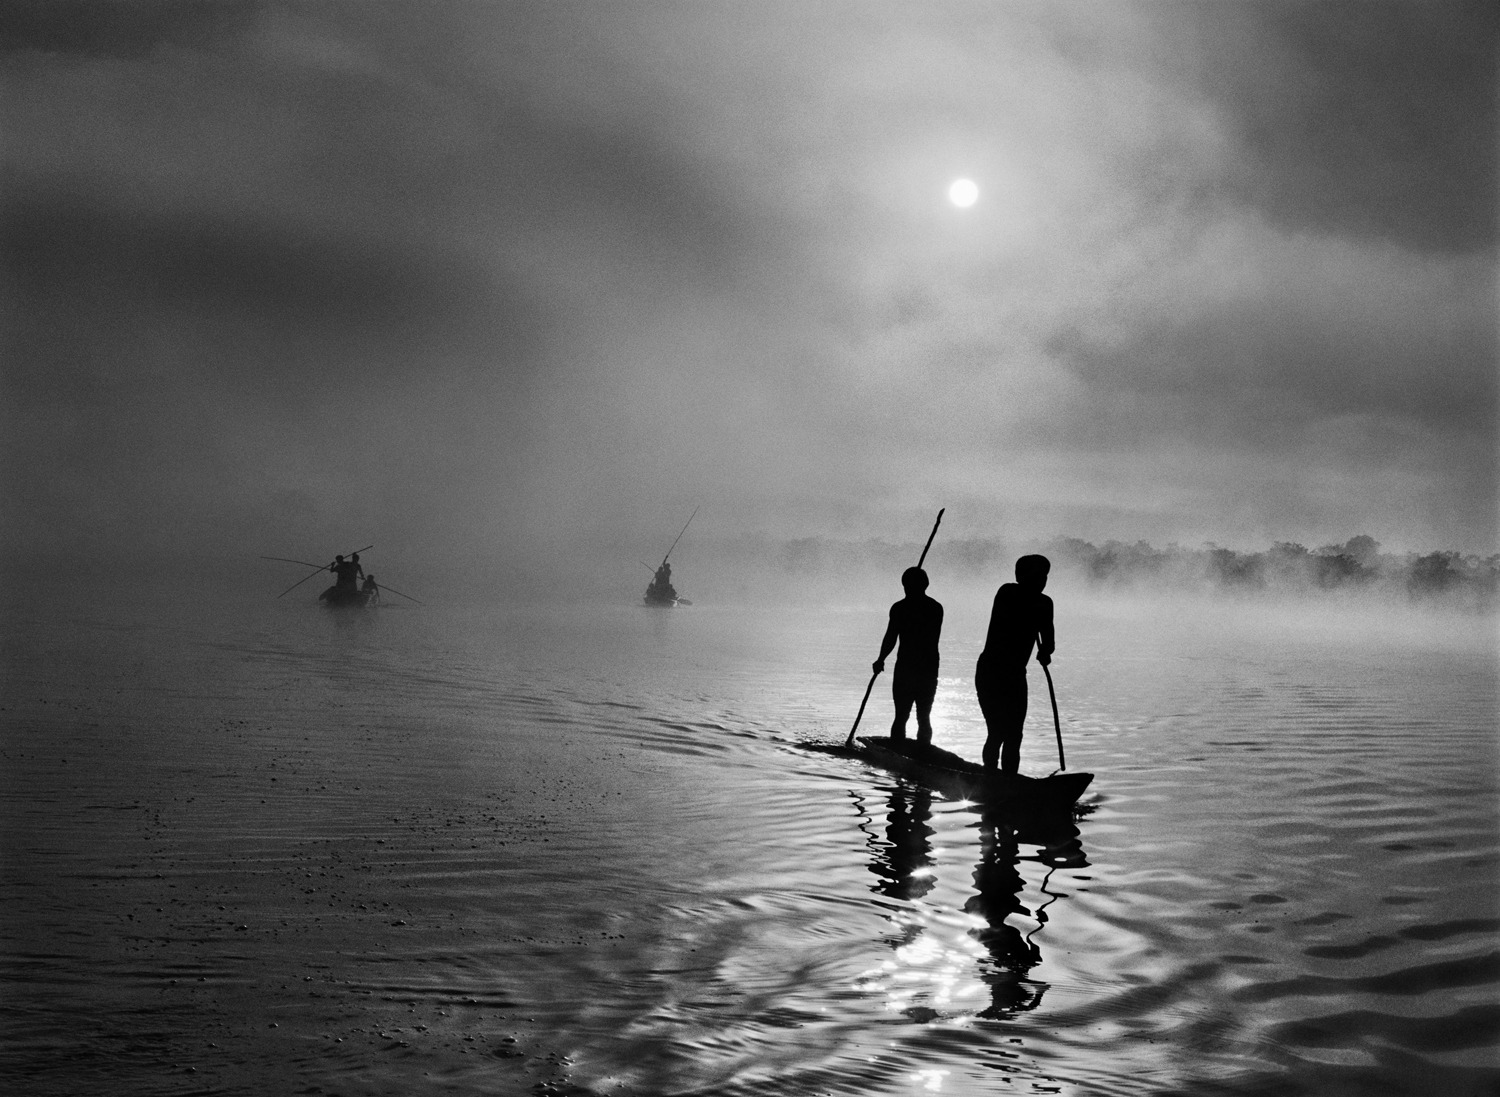 In the Upper Xingu region of Brazil's Mato Grosso state, a group of Waura Indians fish in the Puilanga Lake near their village. Brazil. 2005.